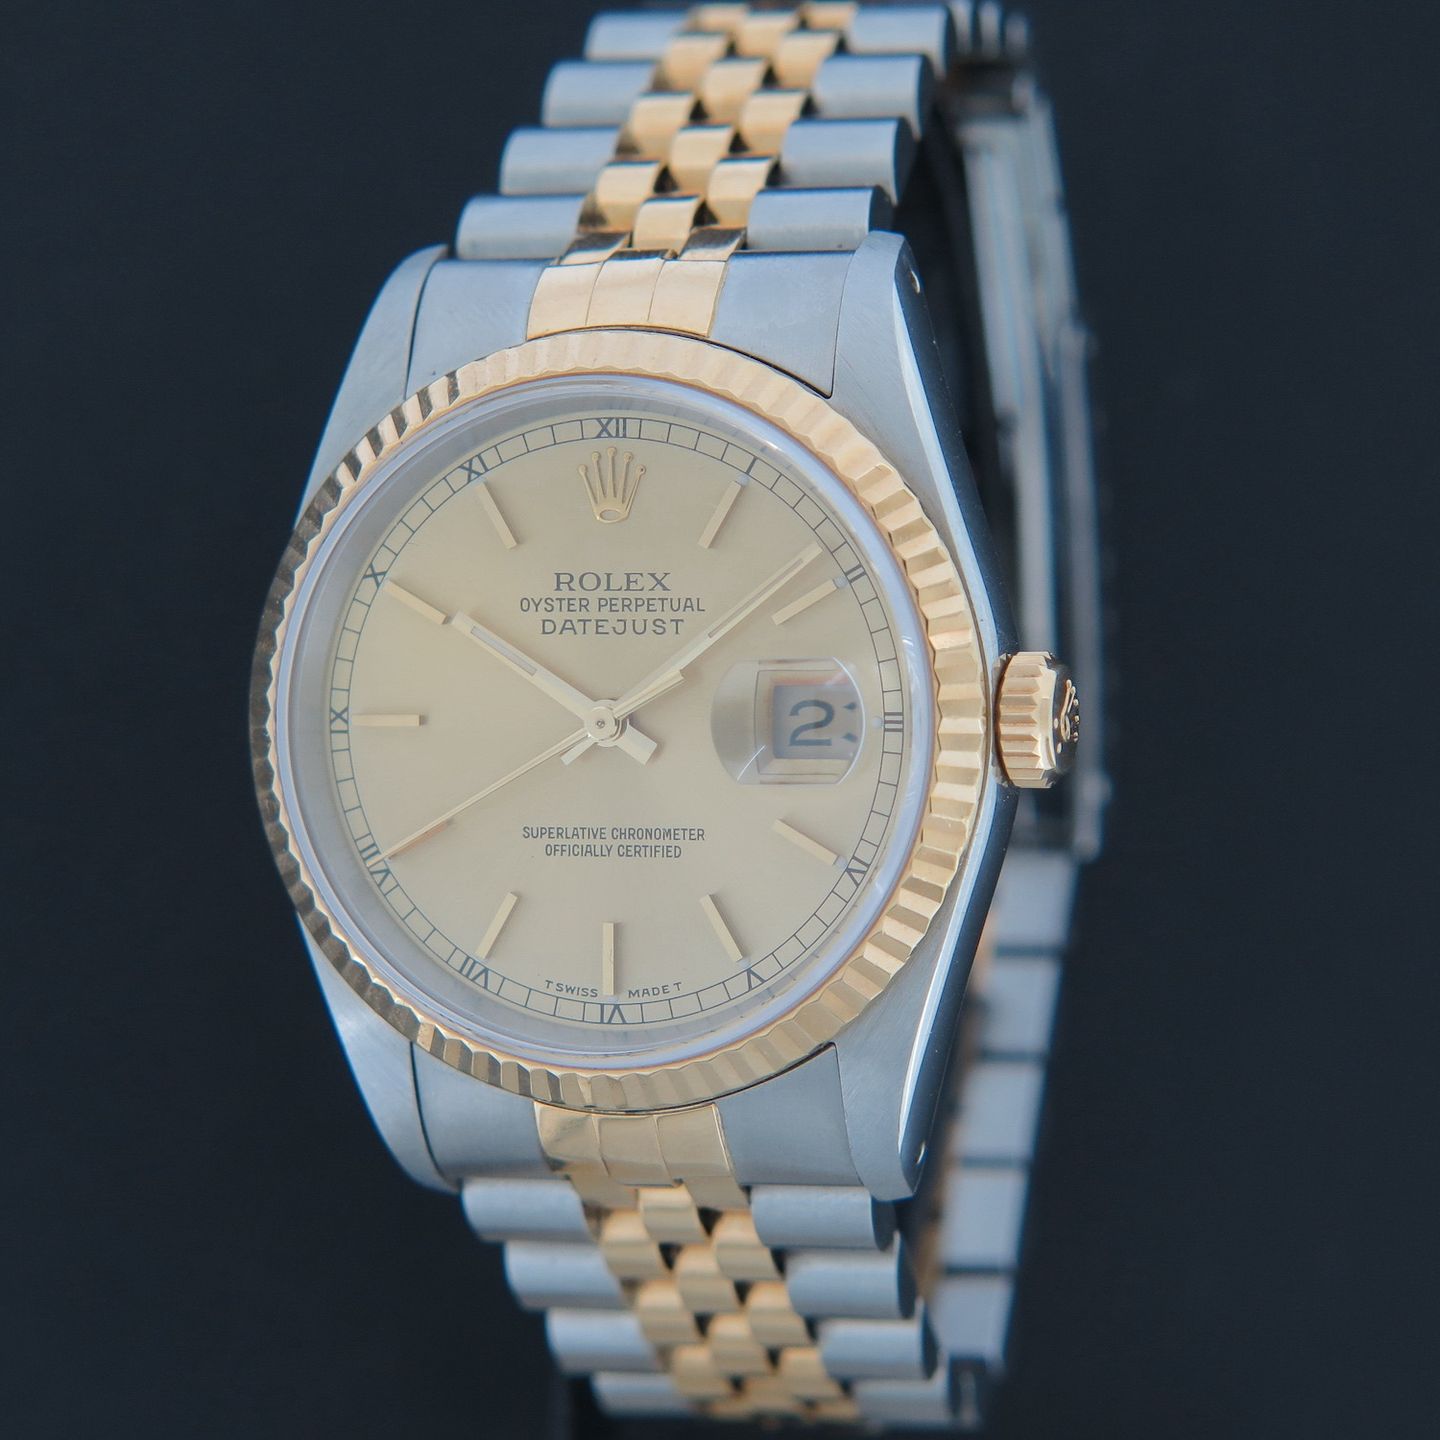 Rolex Datejust 36 116233 (1993) - 36mm Goud/Staal (1/4)